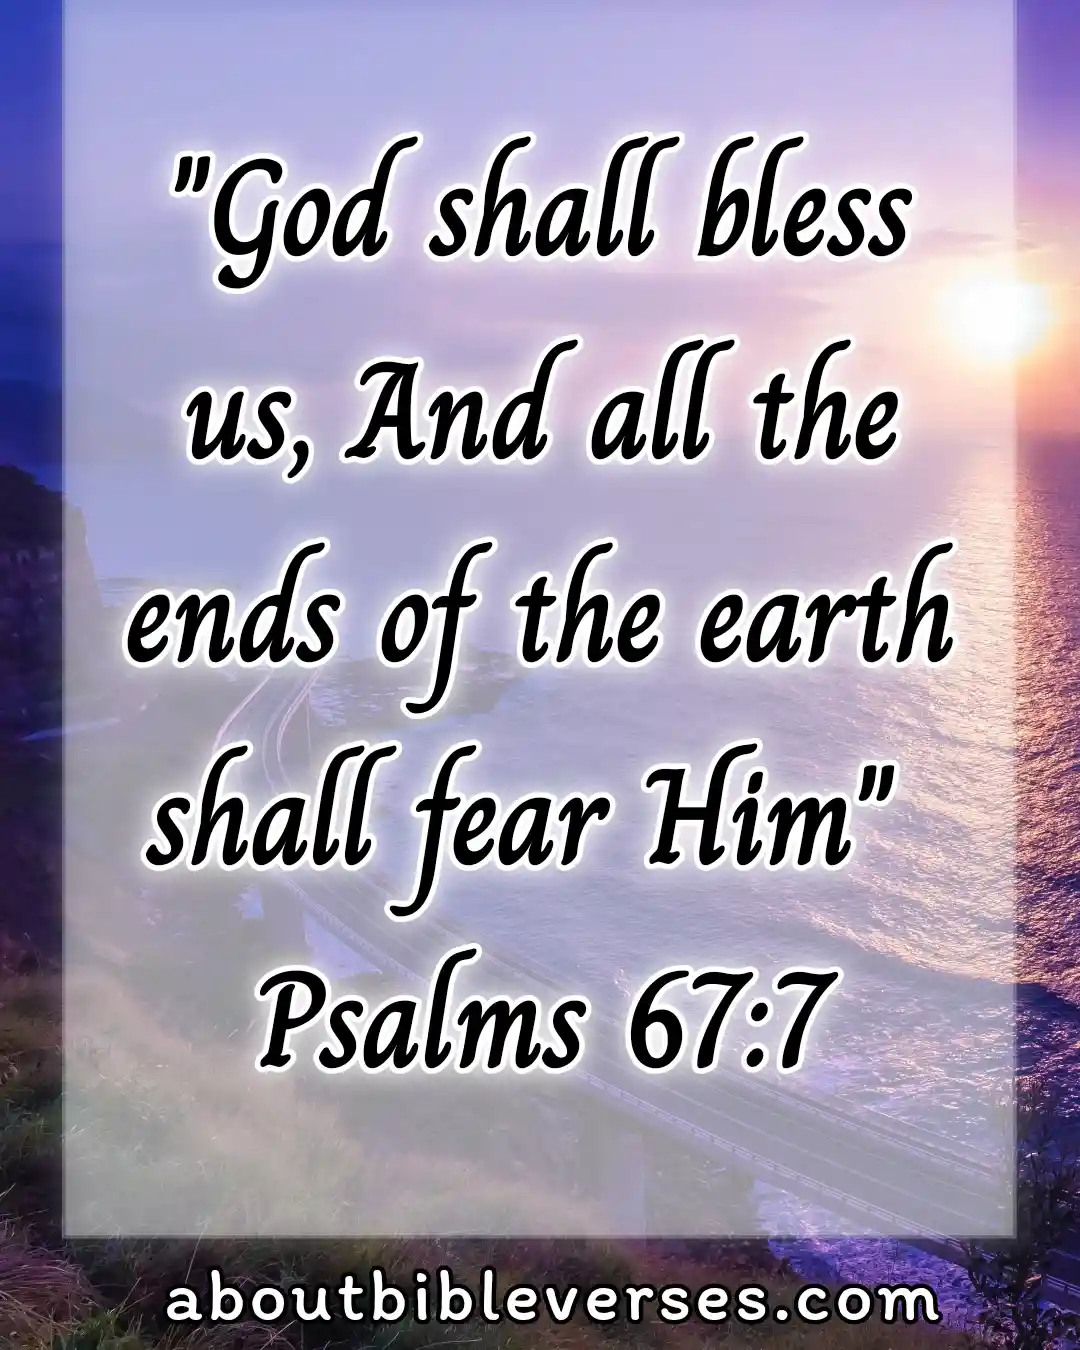 bible verses blessings from God (Psalm 67:7)